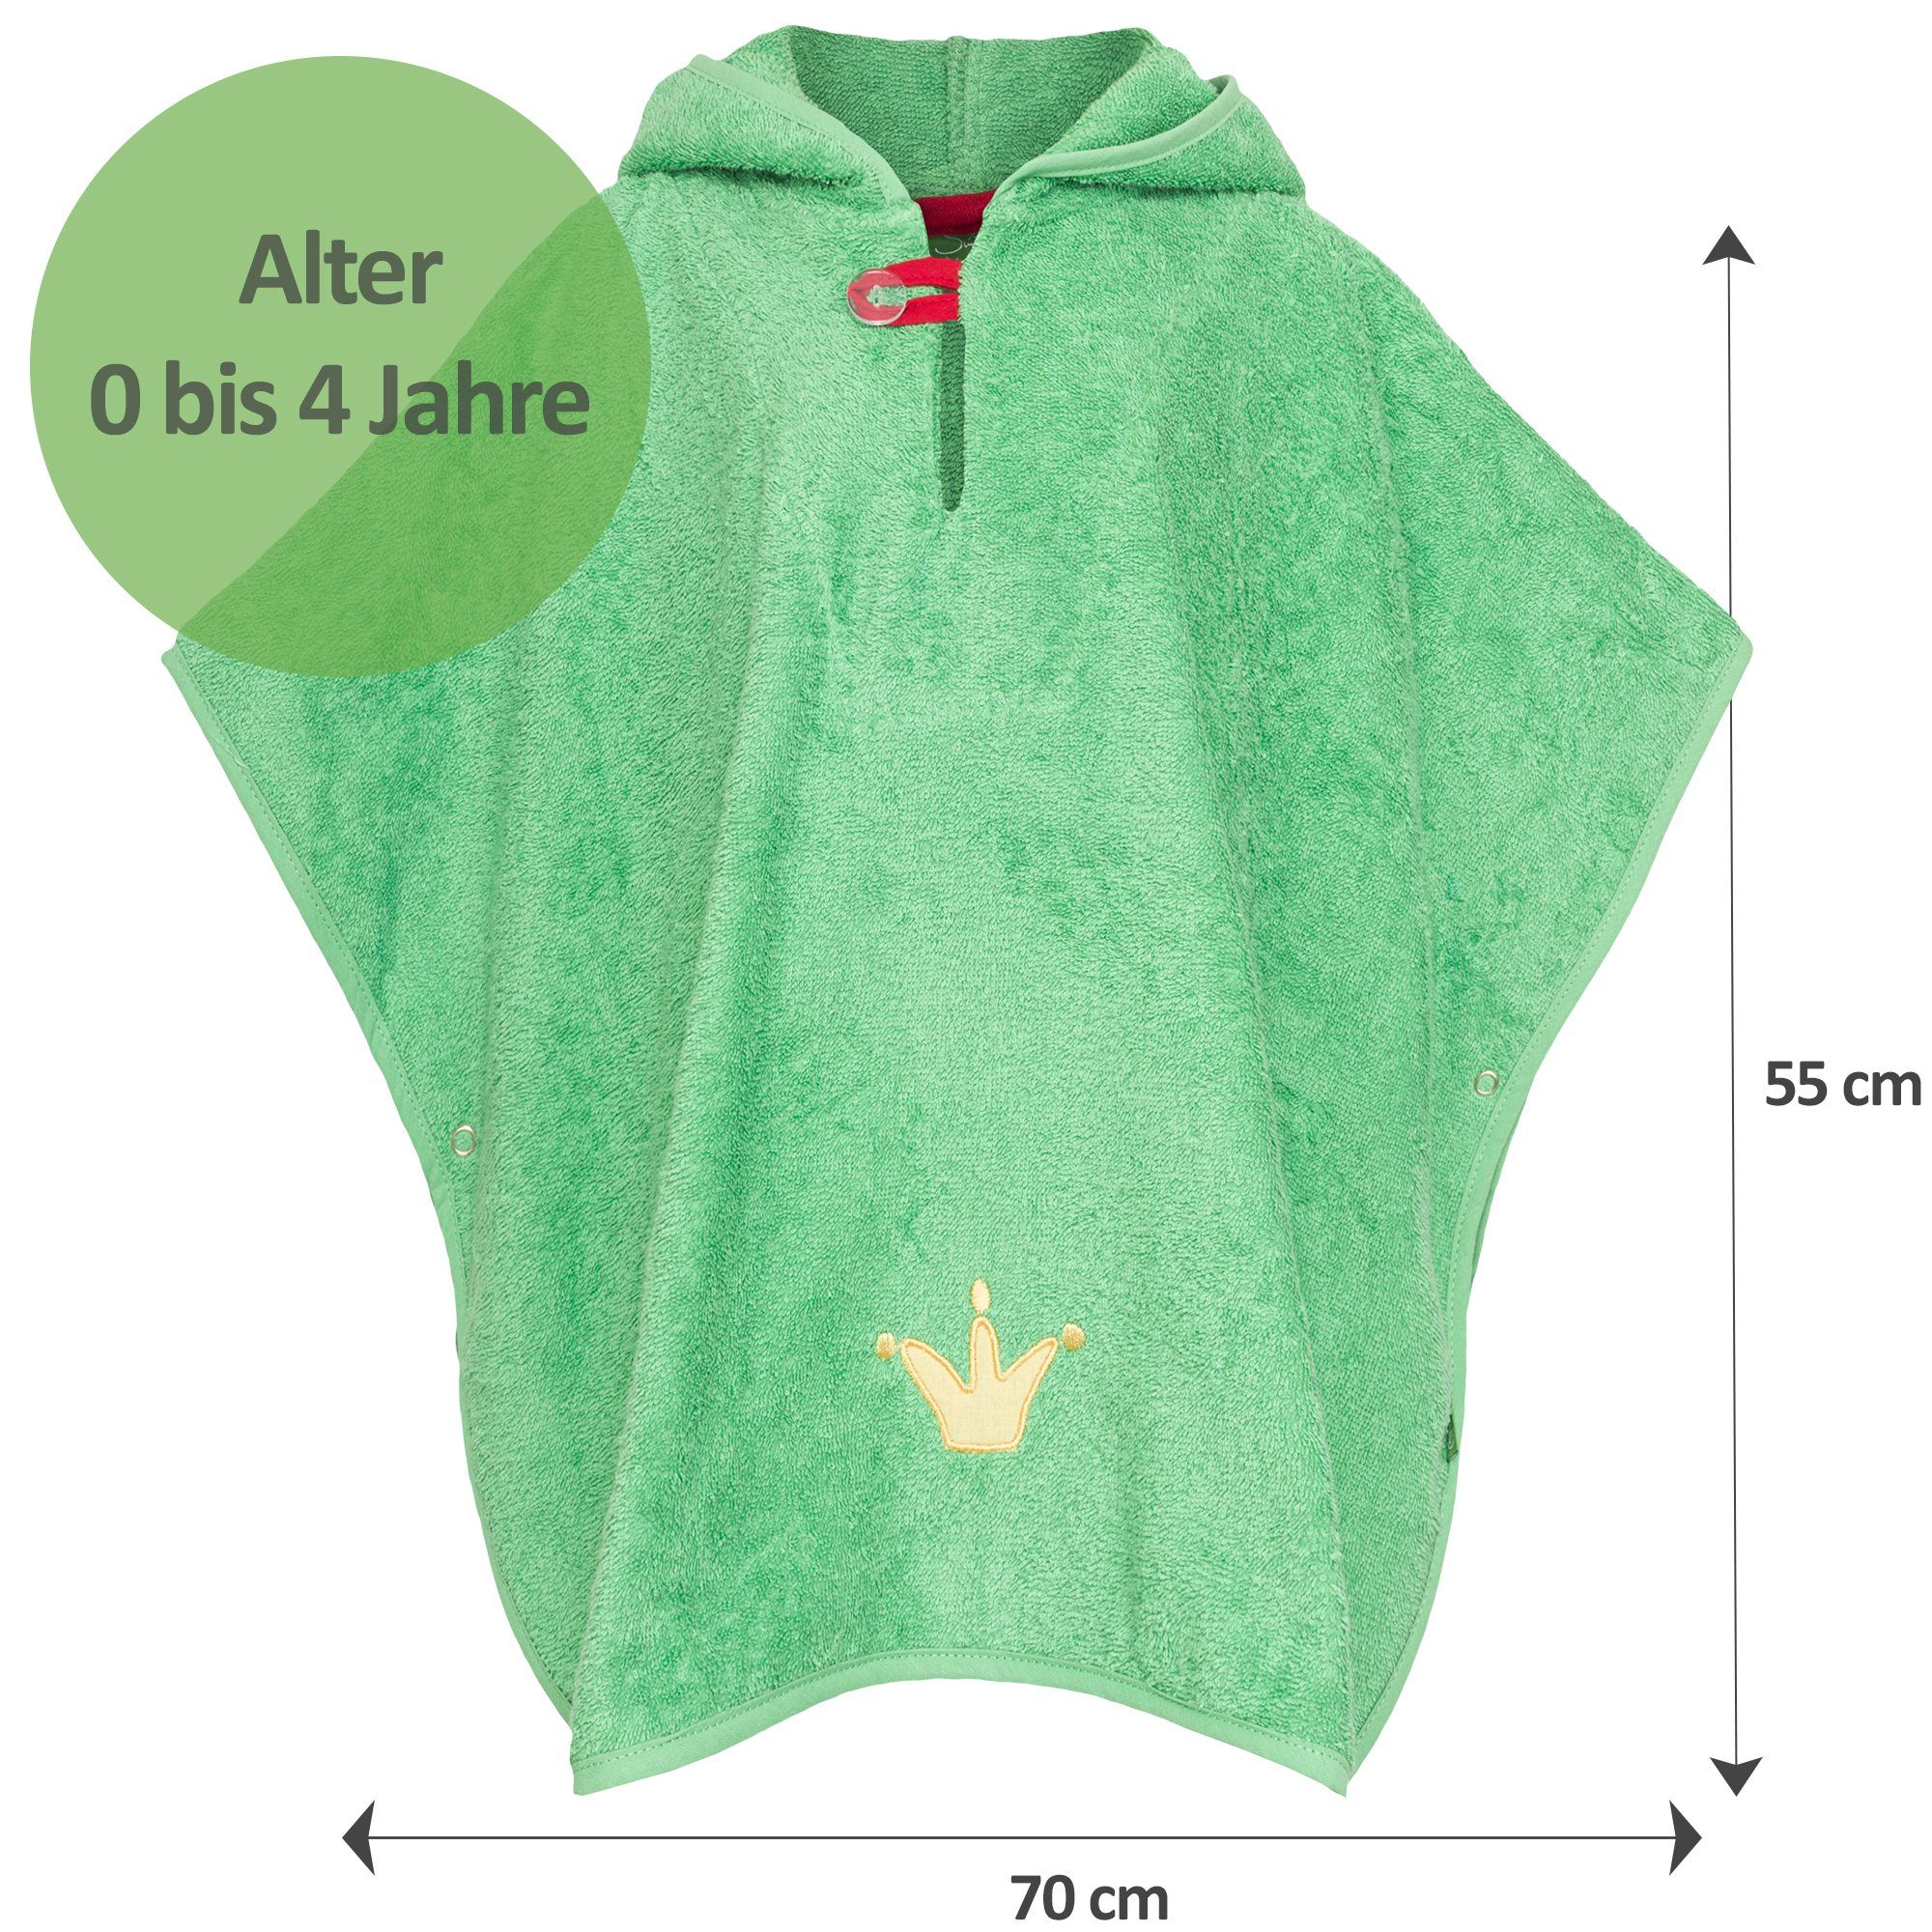 Smithy Badeponcho Baby Europe Frottee, made grün, Frosch, Armloch, am Frottee, Knöpfe in